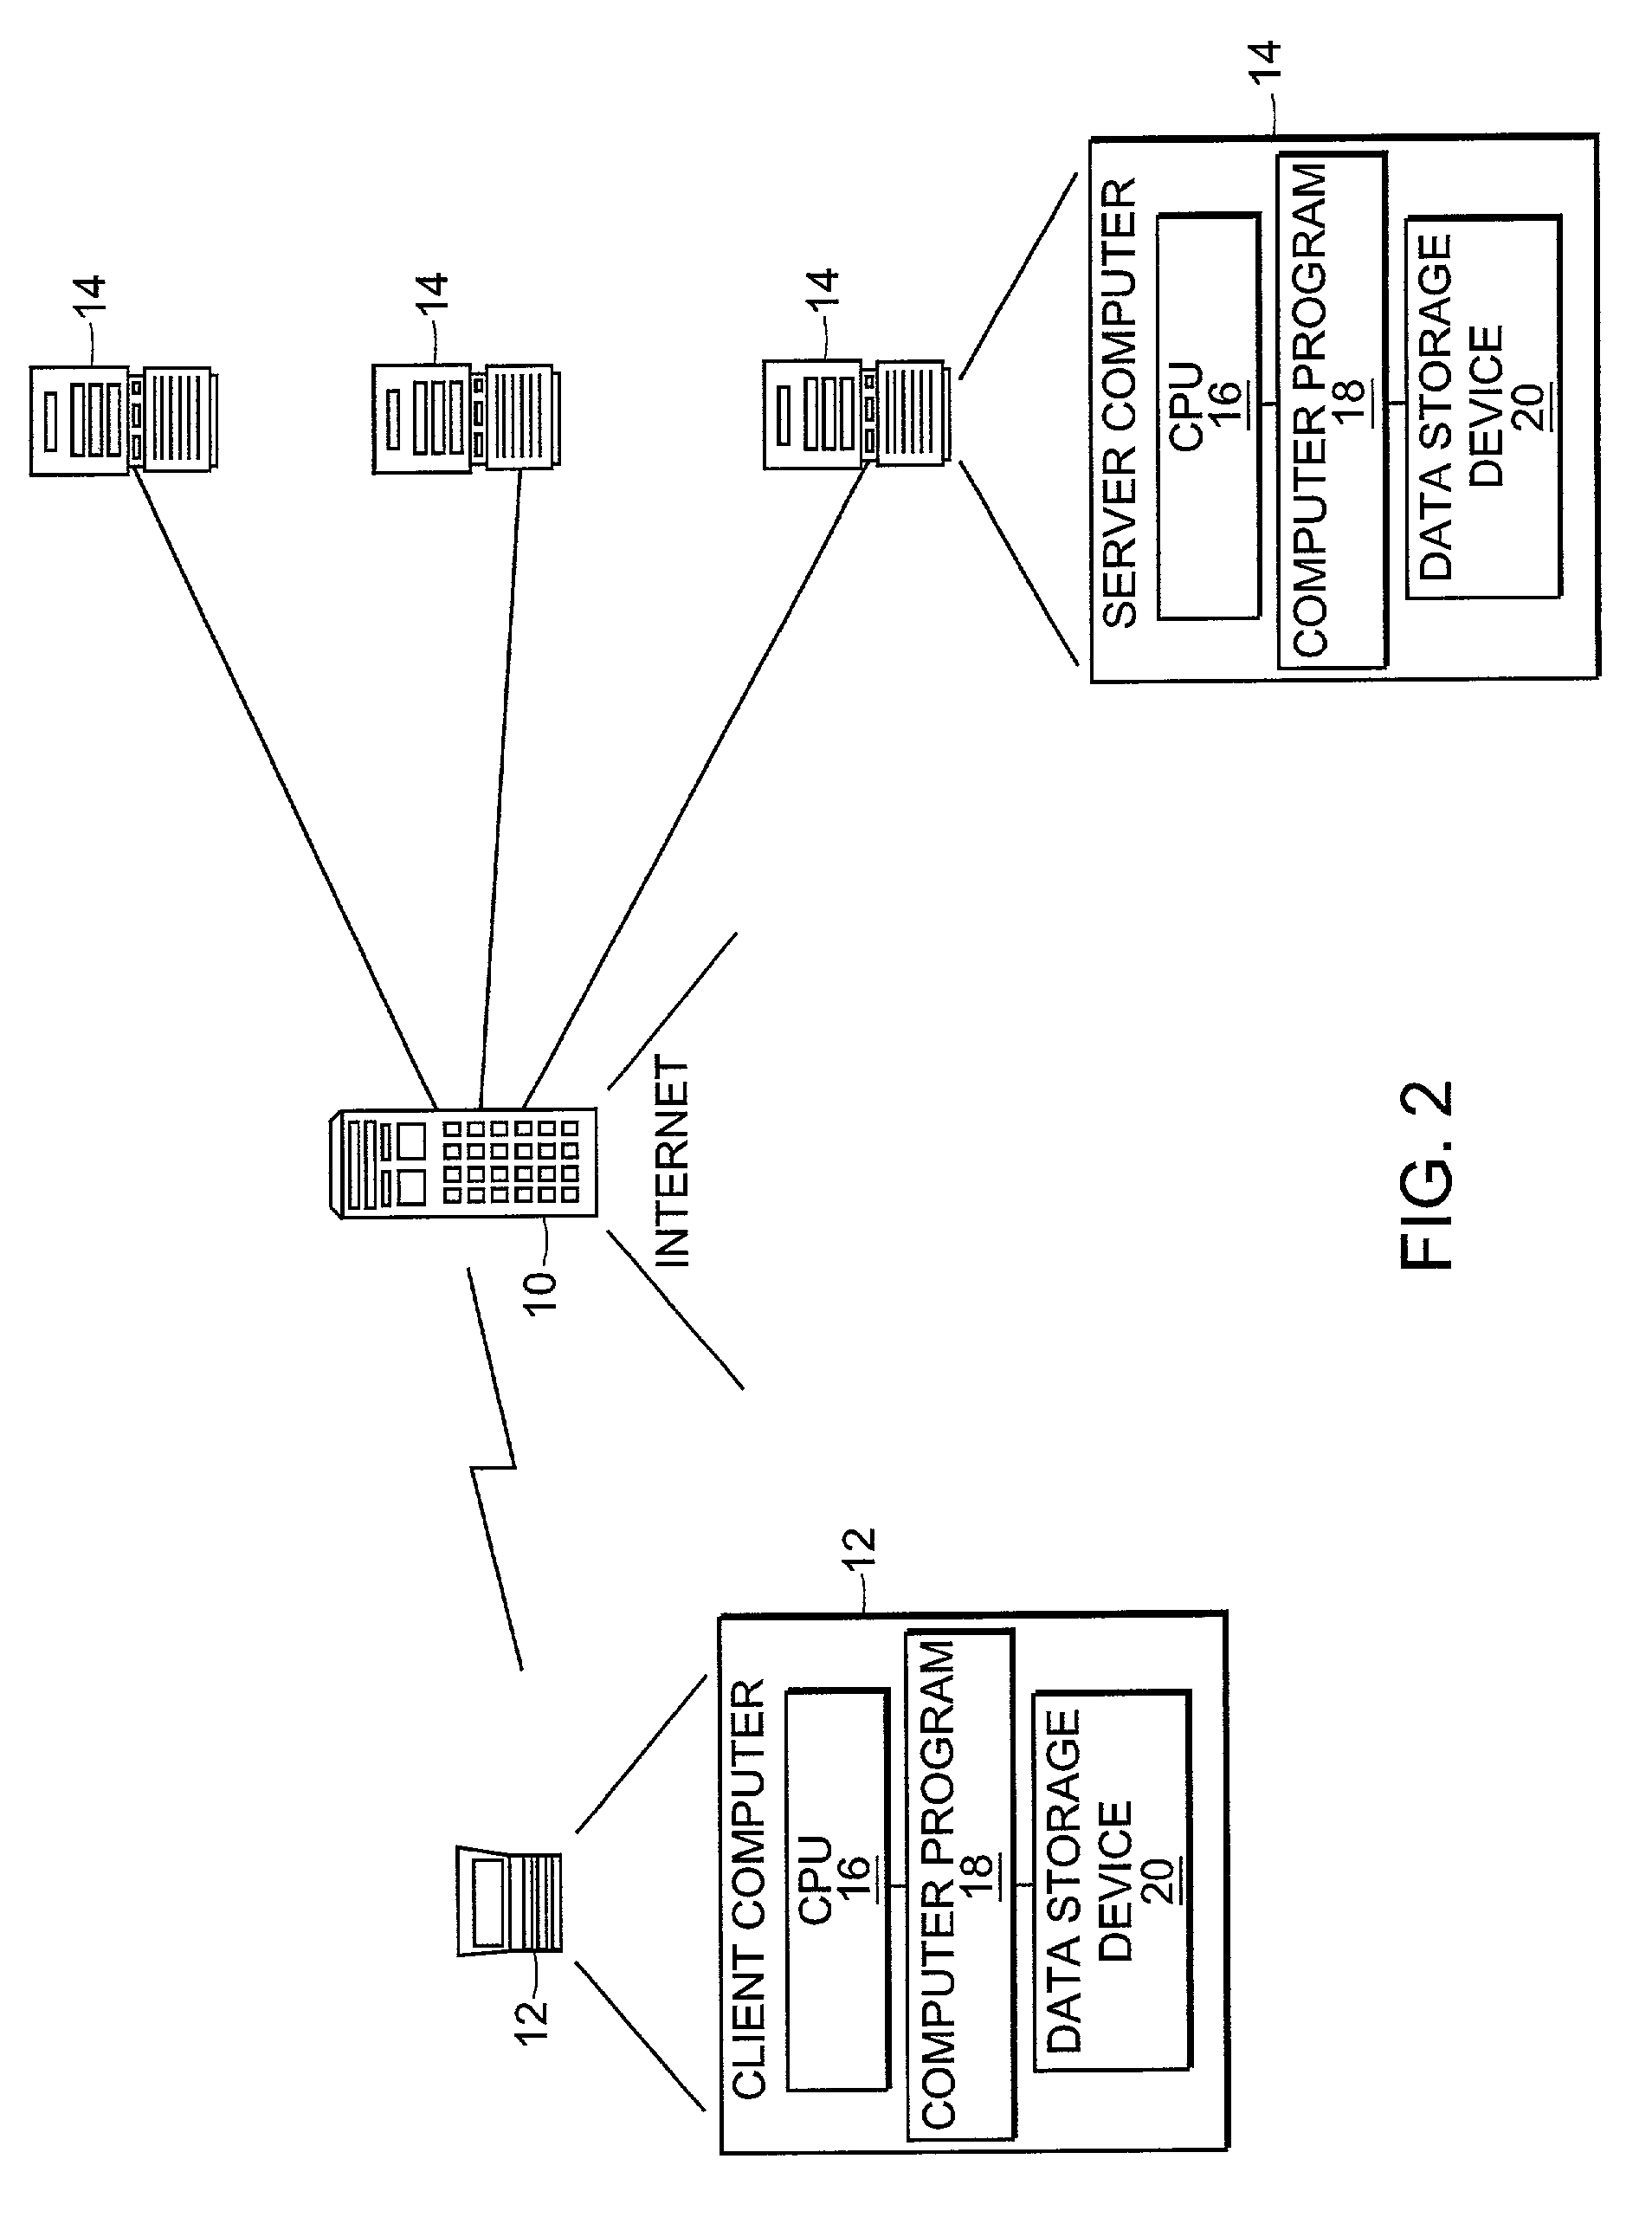 Method and system for determining market demand based on consumer contributions